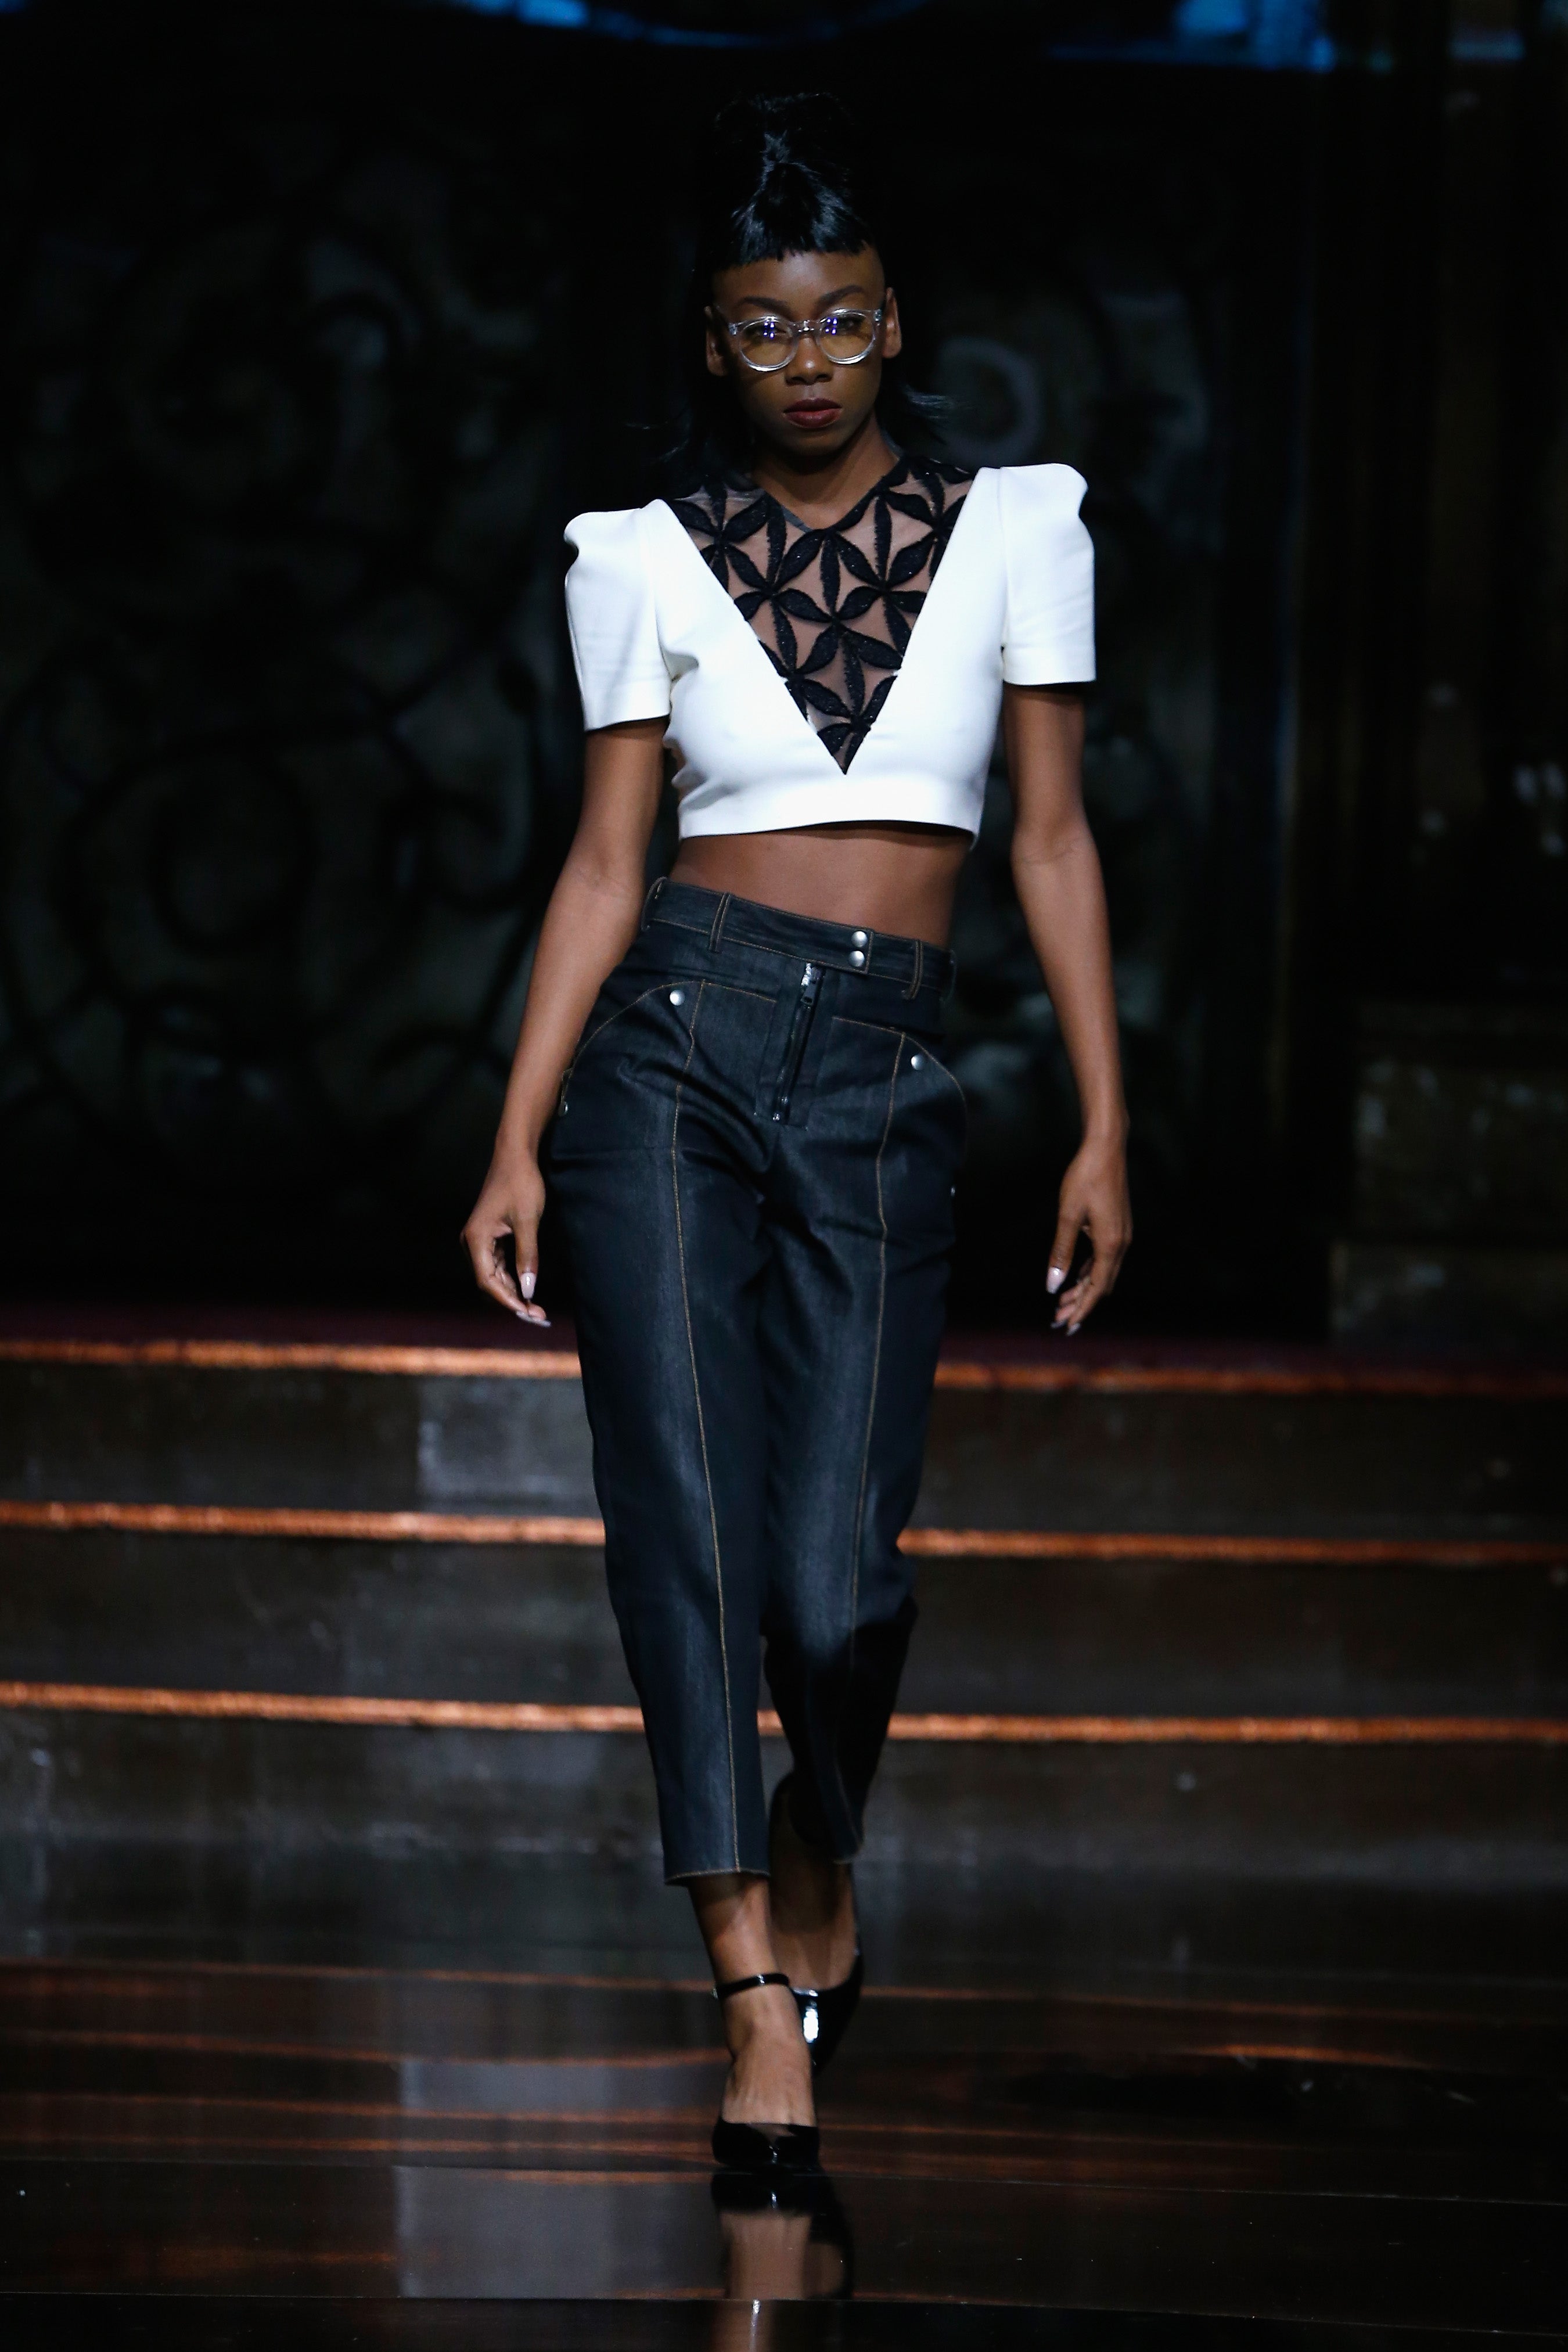 We Run This Town! All the Black Models at New York Fashion Week
